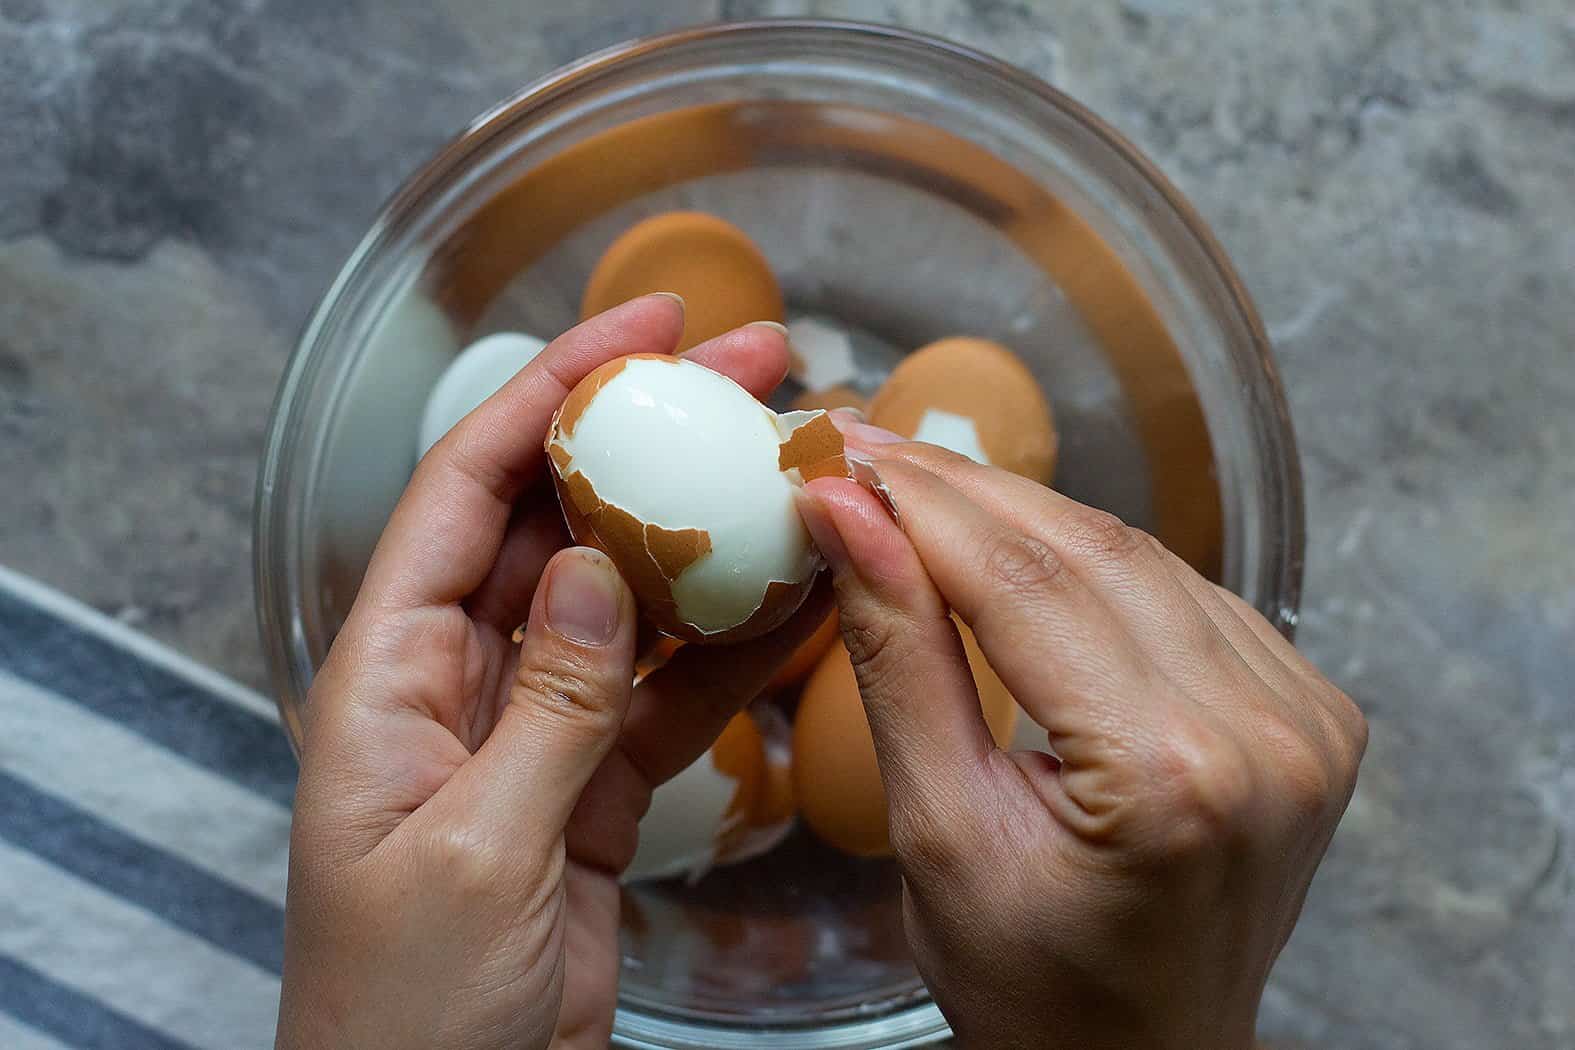 Instant pot hard boiled eggs are the easiest eggs to peel. After they cool in the water bath, roll each egg on the counter to crack and then start peeling right away.